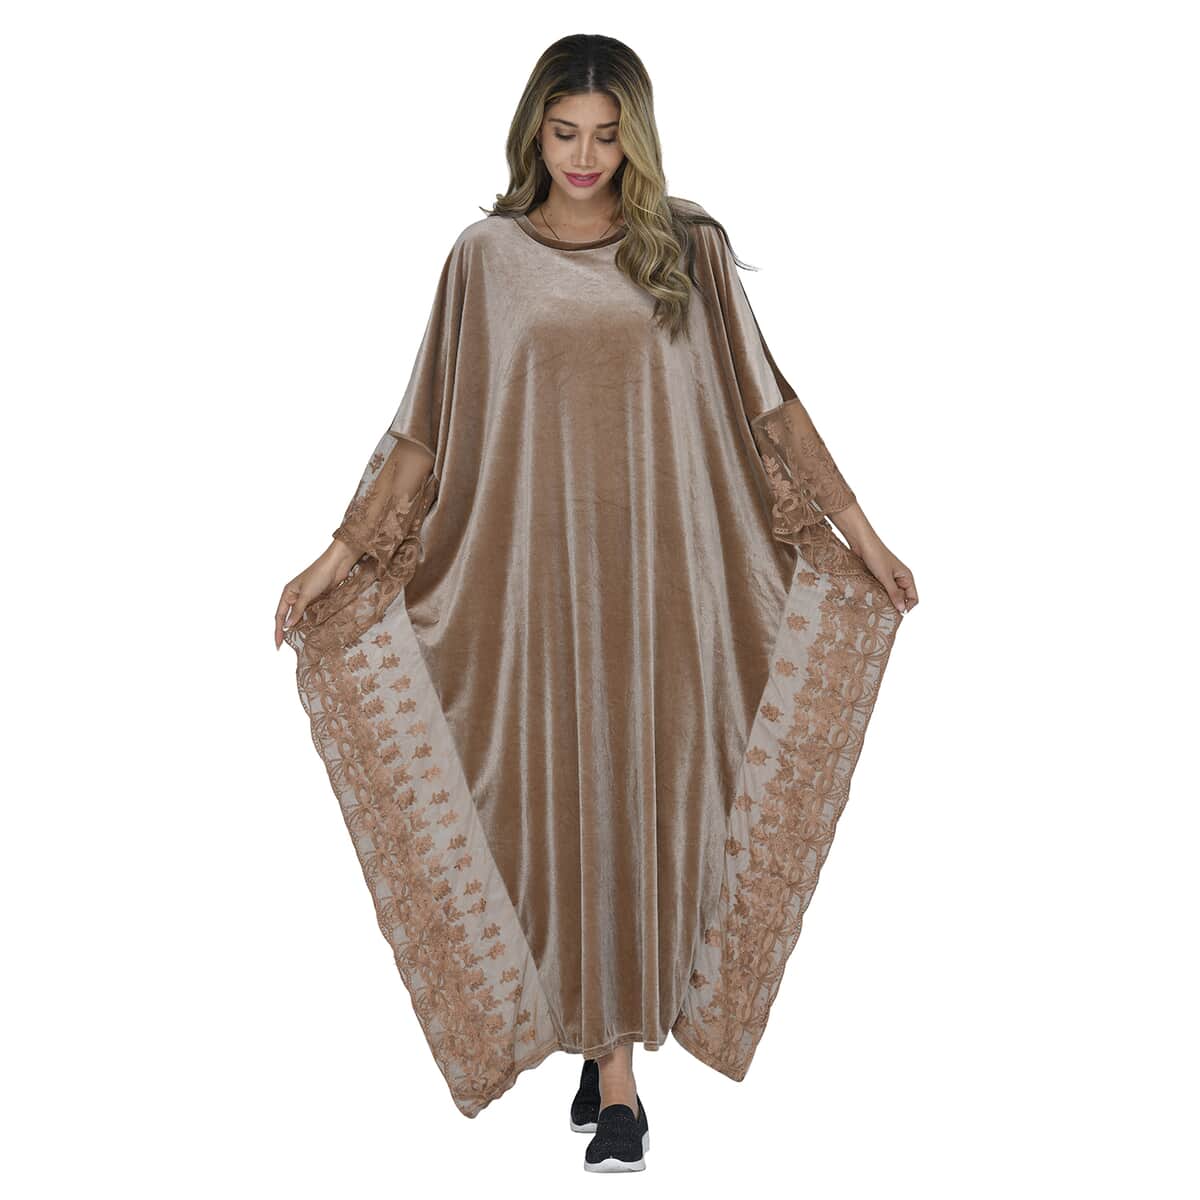 Tamsy Black Label - Lux Stretch Velvet Kaftan with Lace in Caramel - One Size Fits Most image number 0